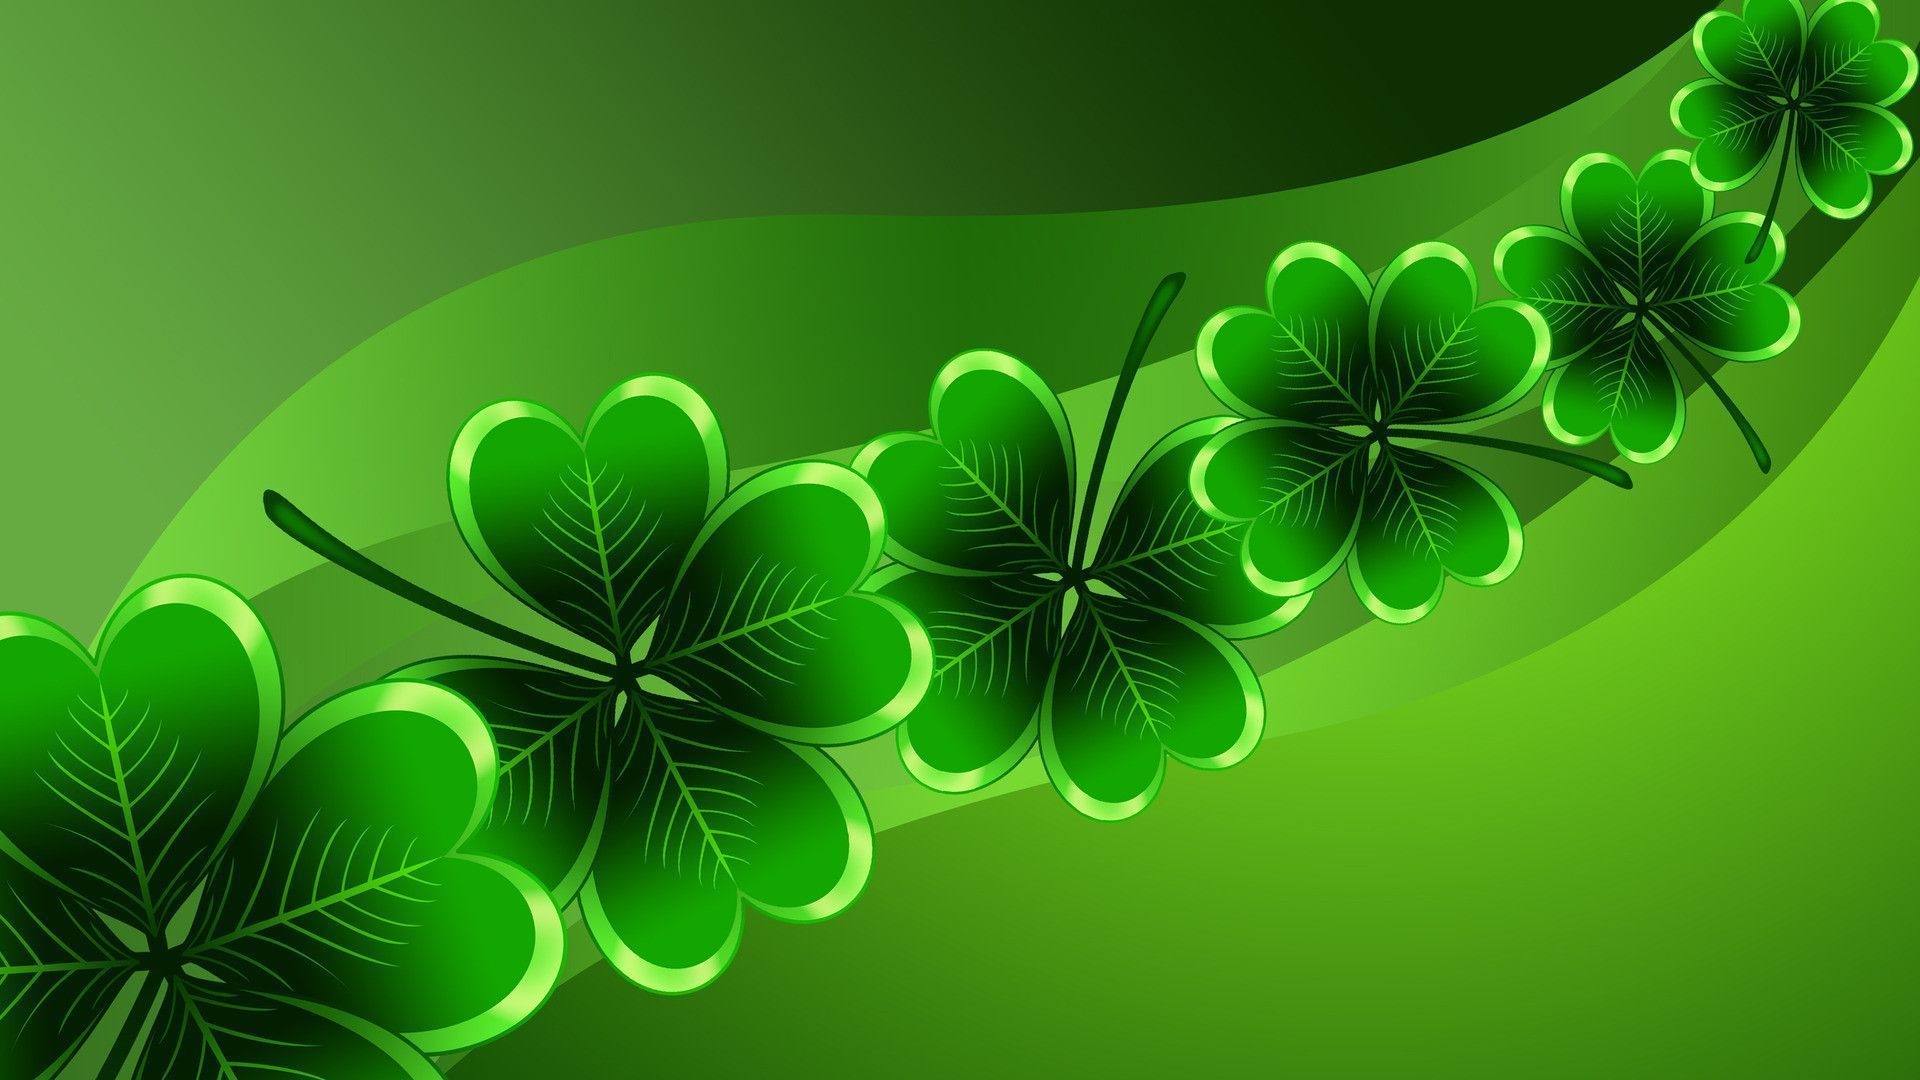 1920x1080 Saint Patrick's Day Wallpapers Top Free Saint Patrick's Day Backgrounds